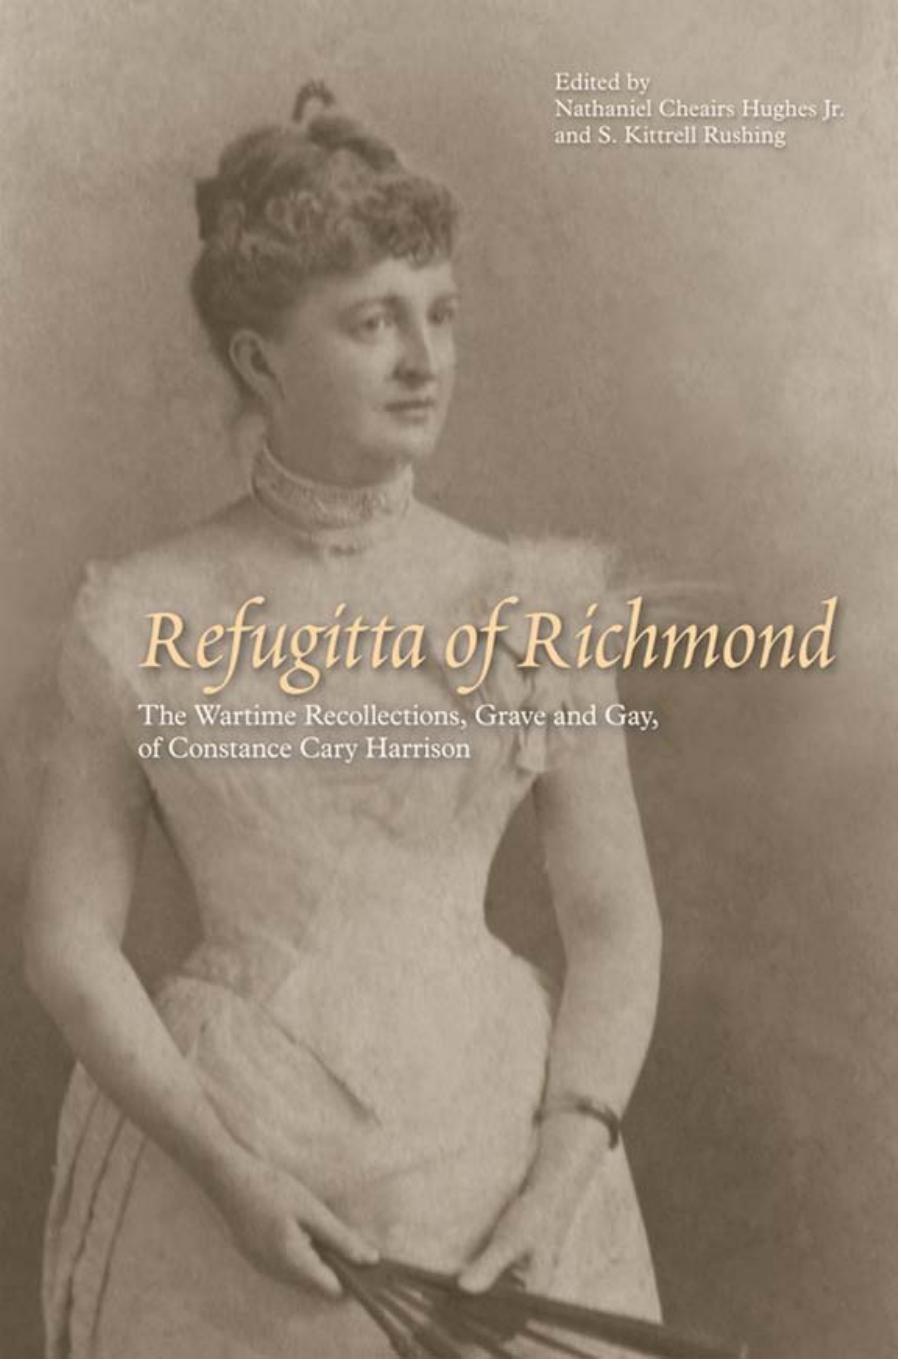 Refugitta of Richmond : The Wartime Recollections, Grave and Gay, of Constance Cary Harrison by Nathaniel Cheairs Hughes; S. Kittrell Rushing